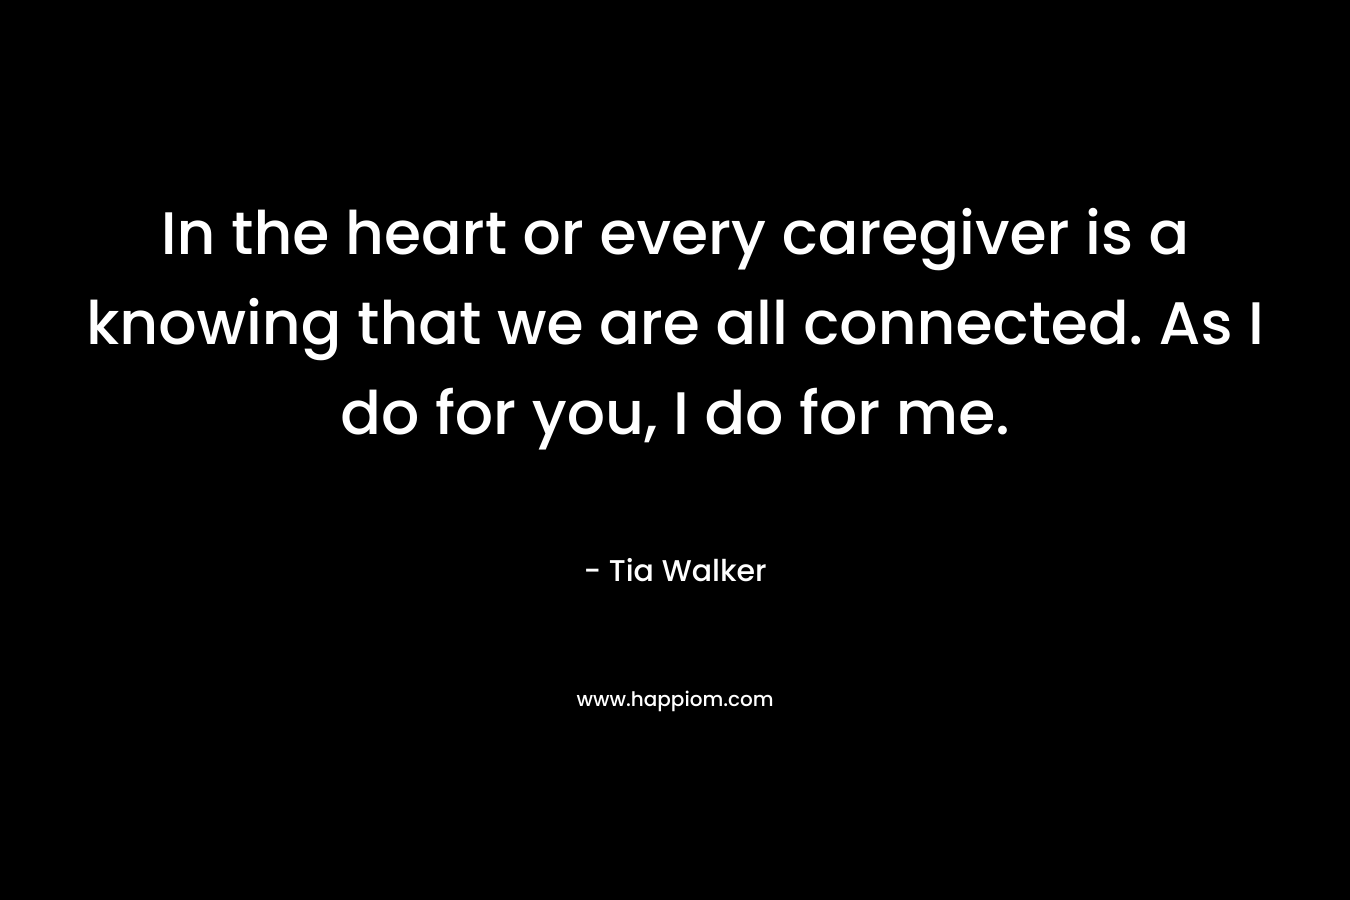 In the heart or every caregiver is a knowing that we are all connected. As I do for you, I do for me. – Tia Walker